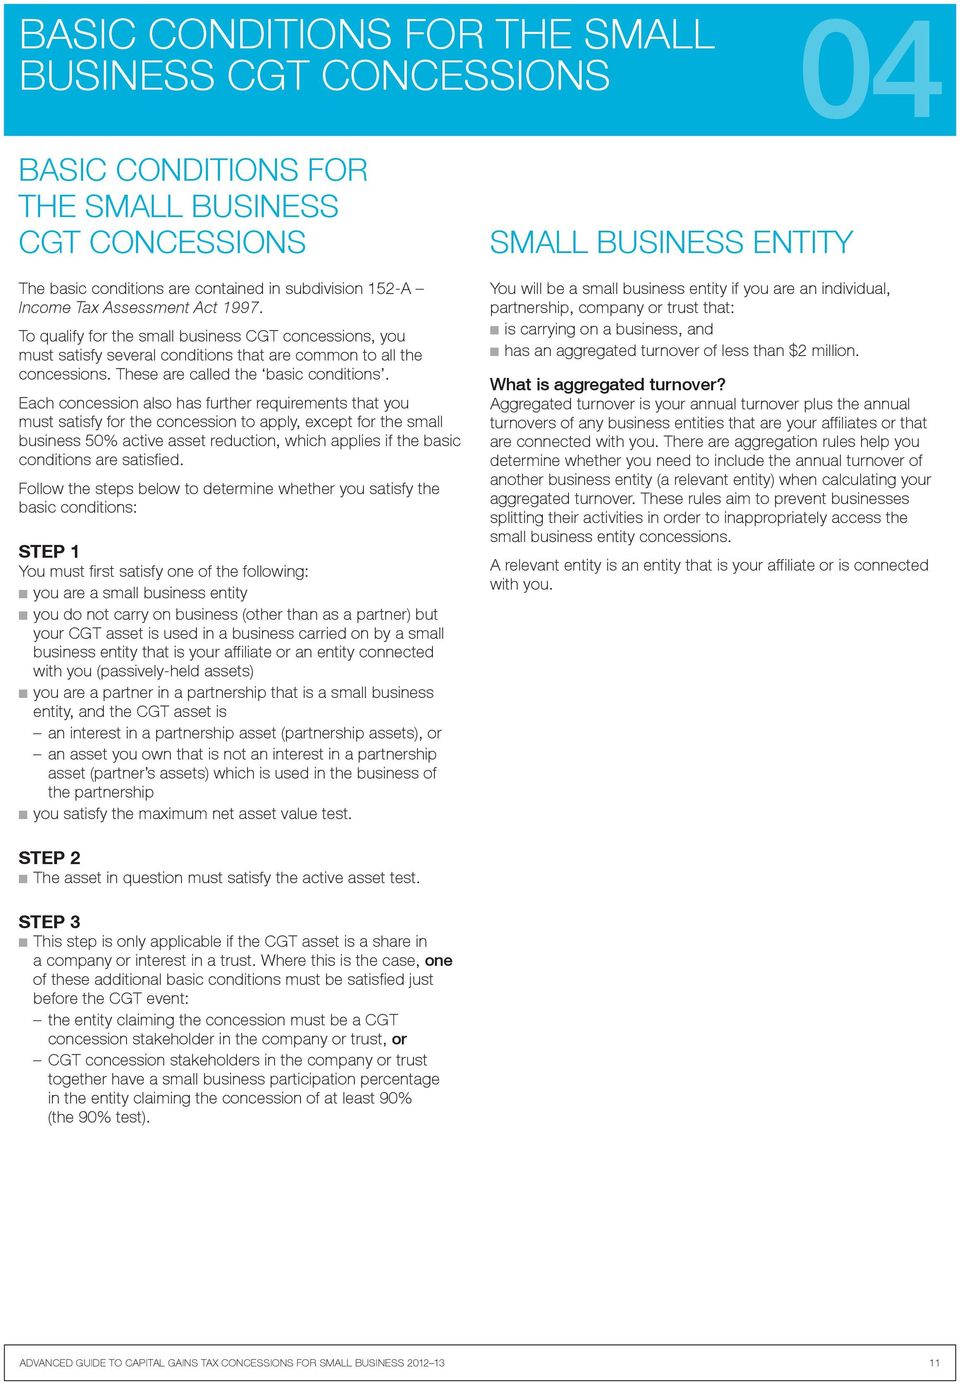 Each concession also has further requirements that you must satisfy for the concession to apply, except for the small business 50% active asset reduction, which applies if the basic conditions are